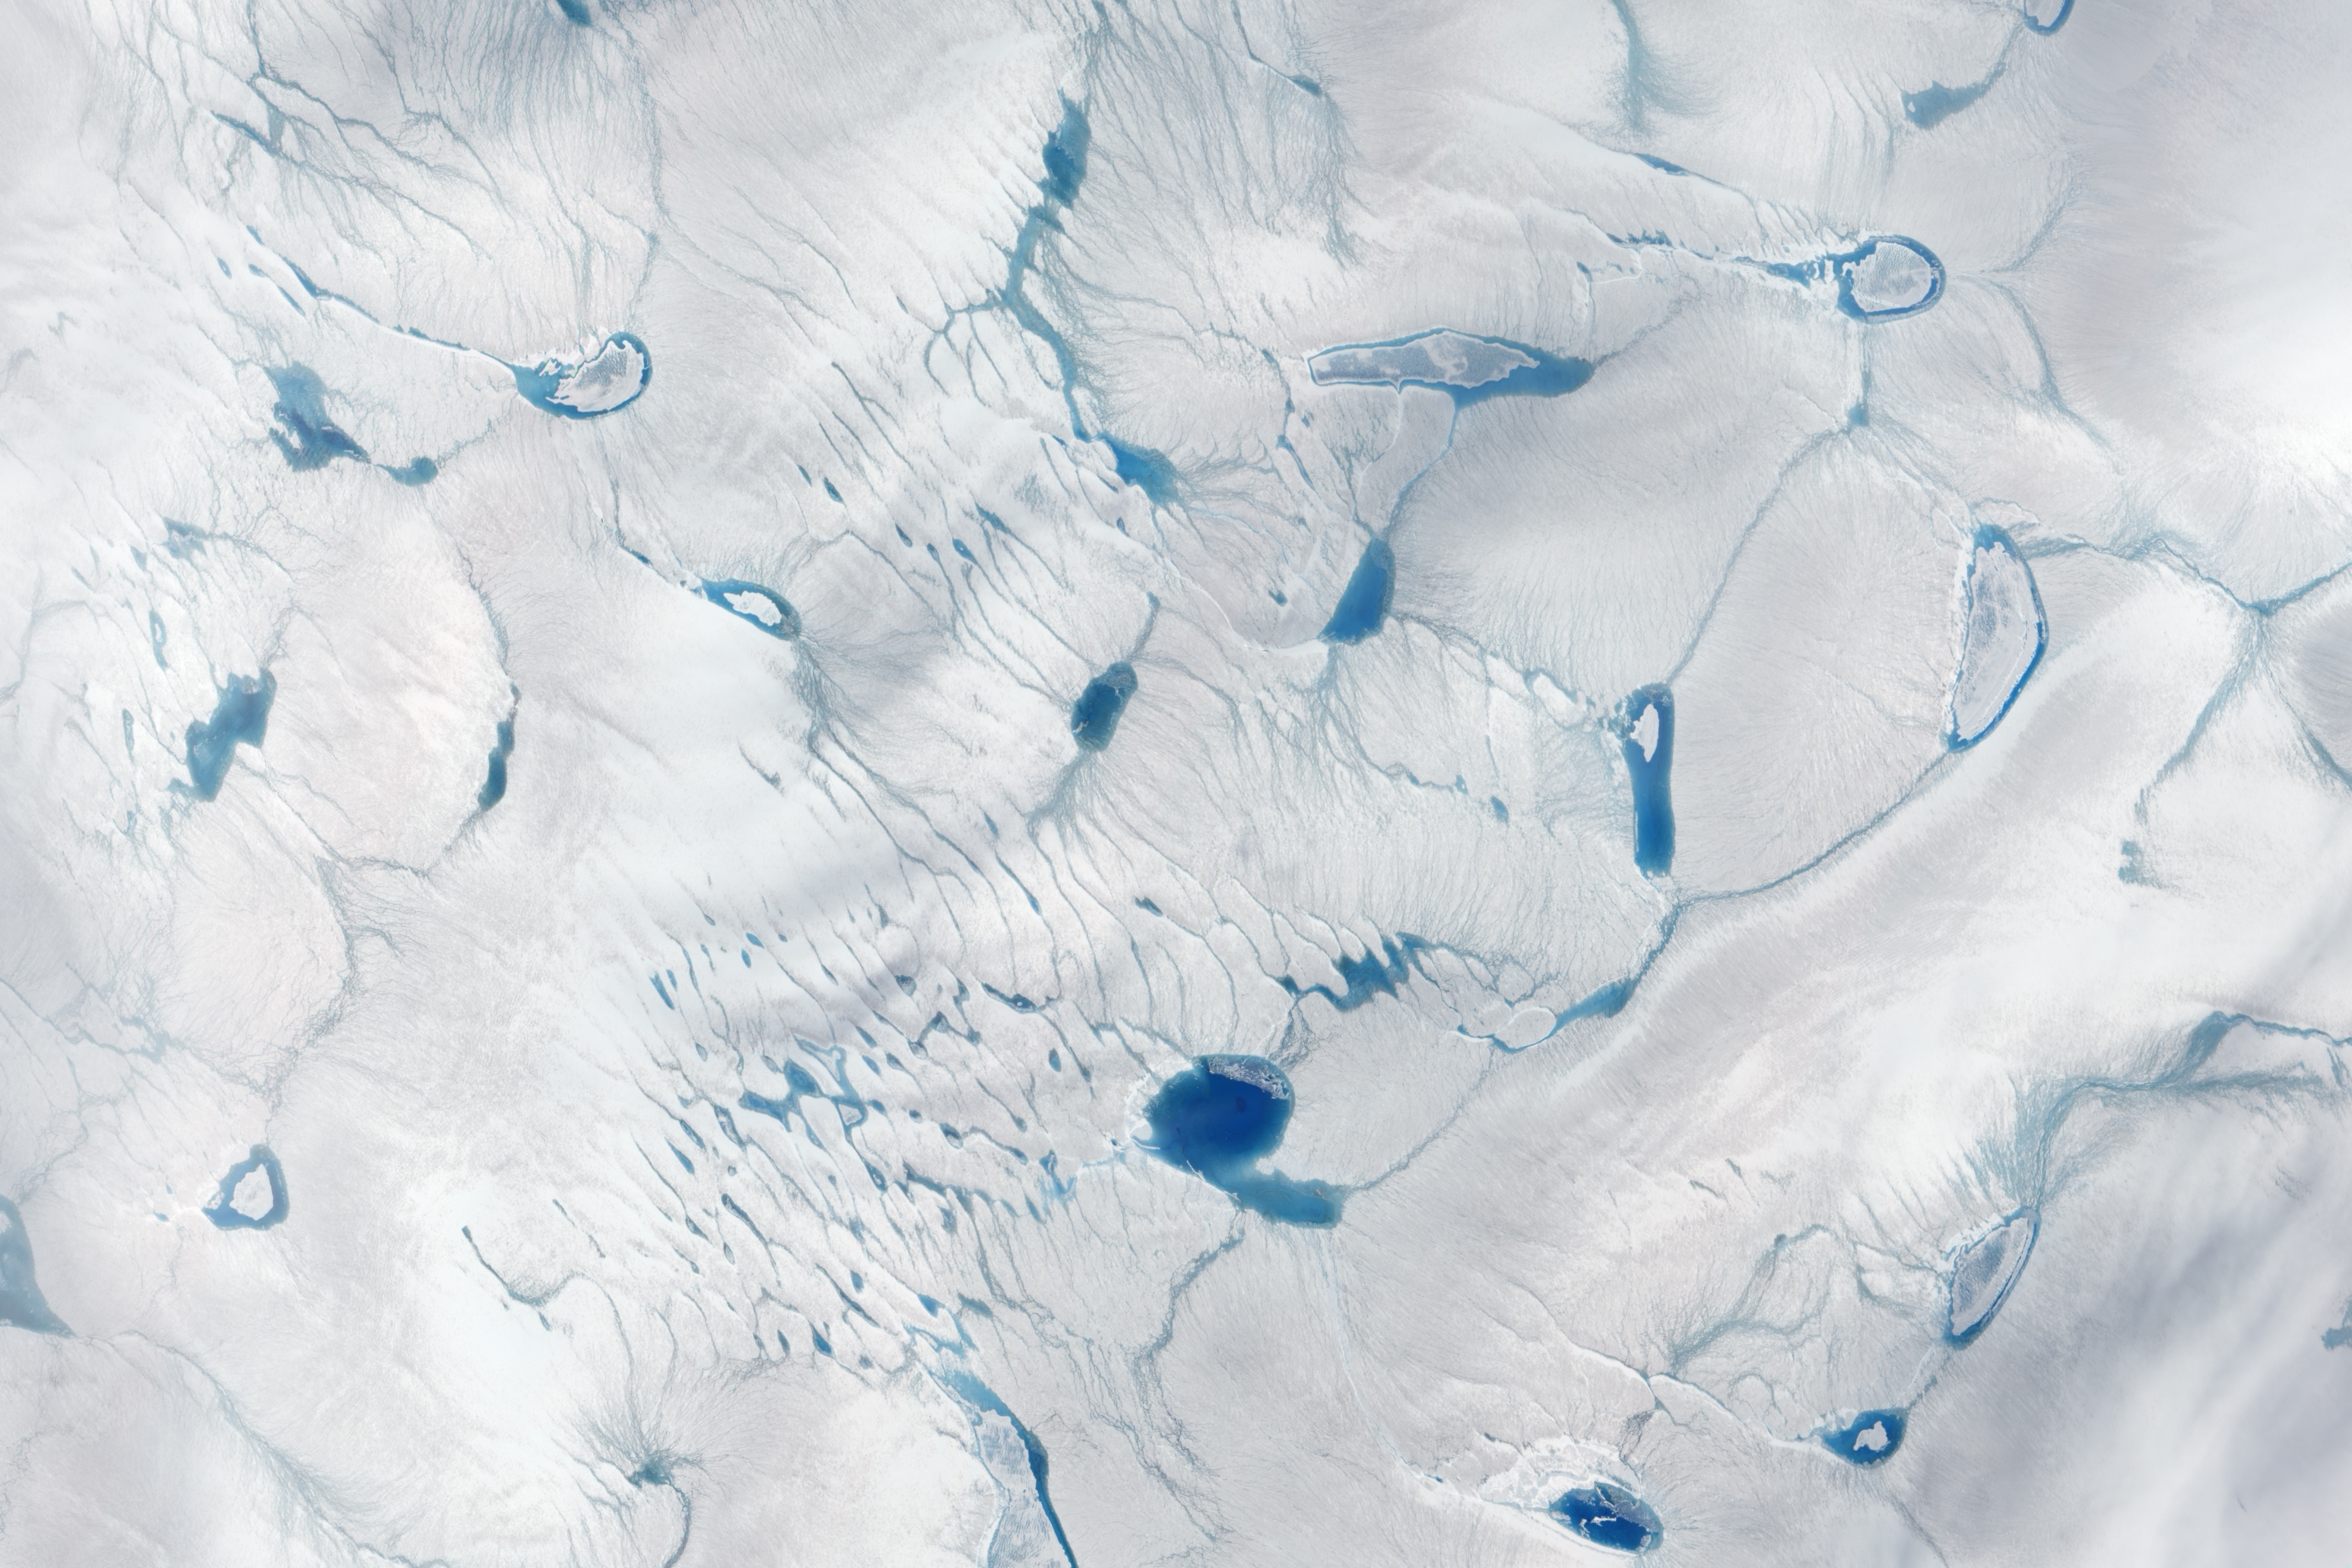 Early Melt on the Greenland Ice Sheet - related image preview